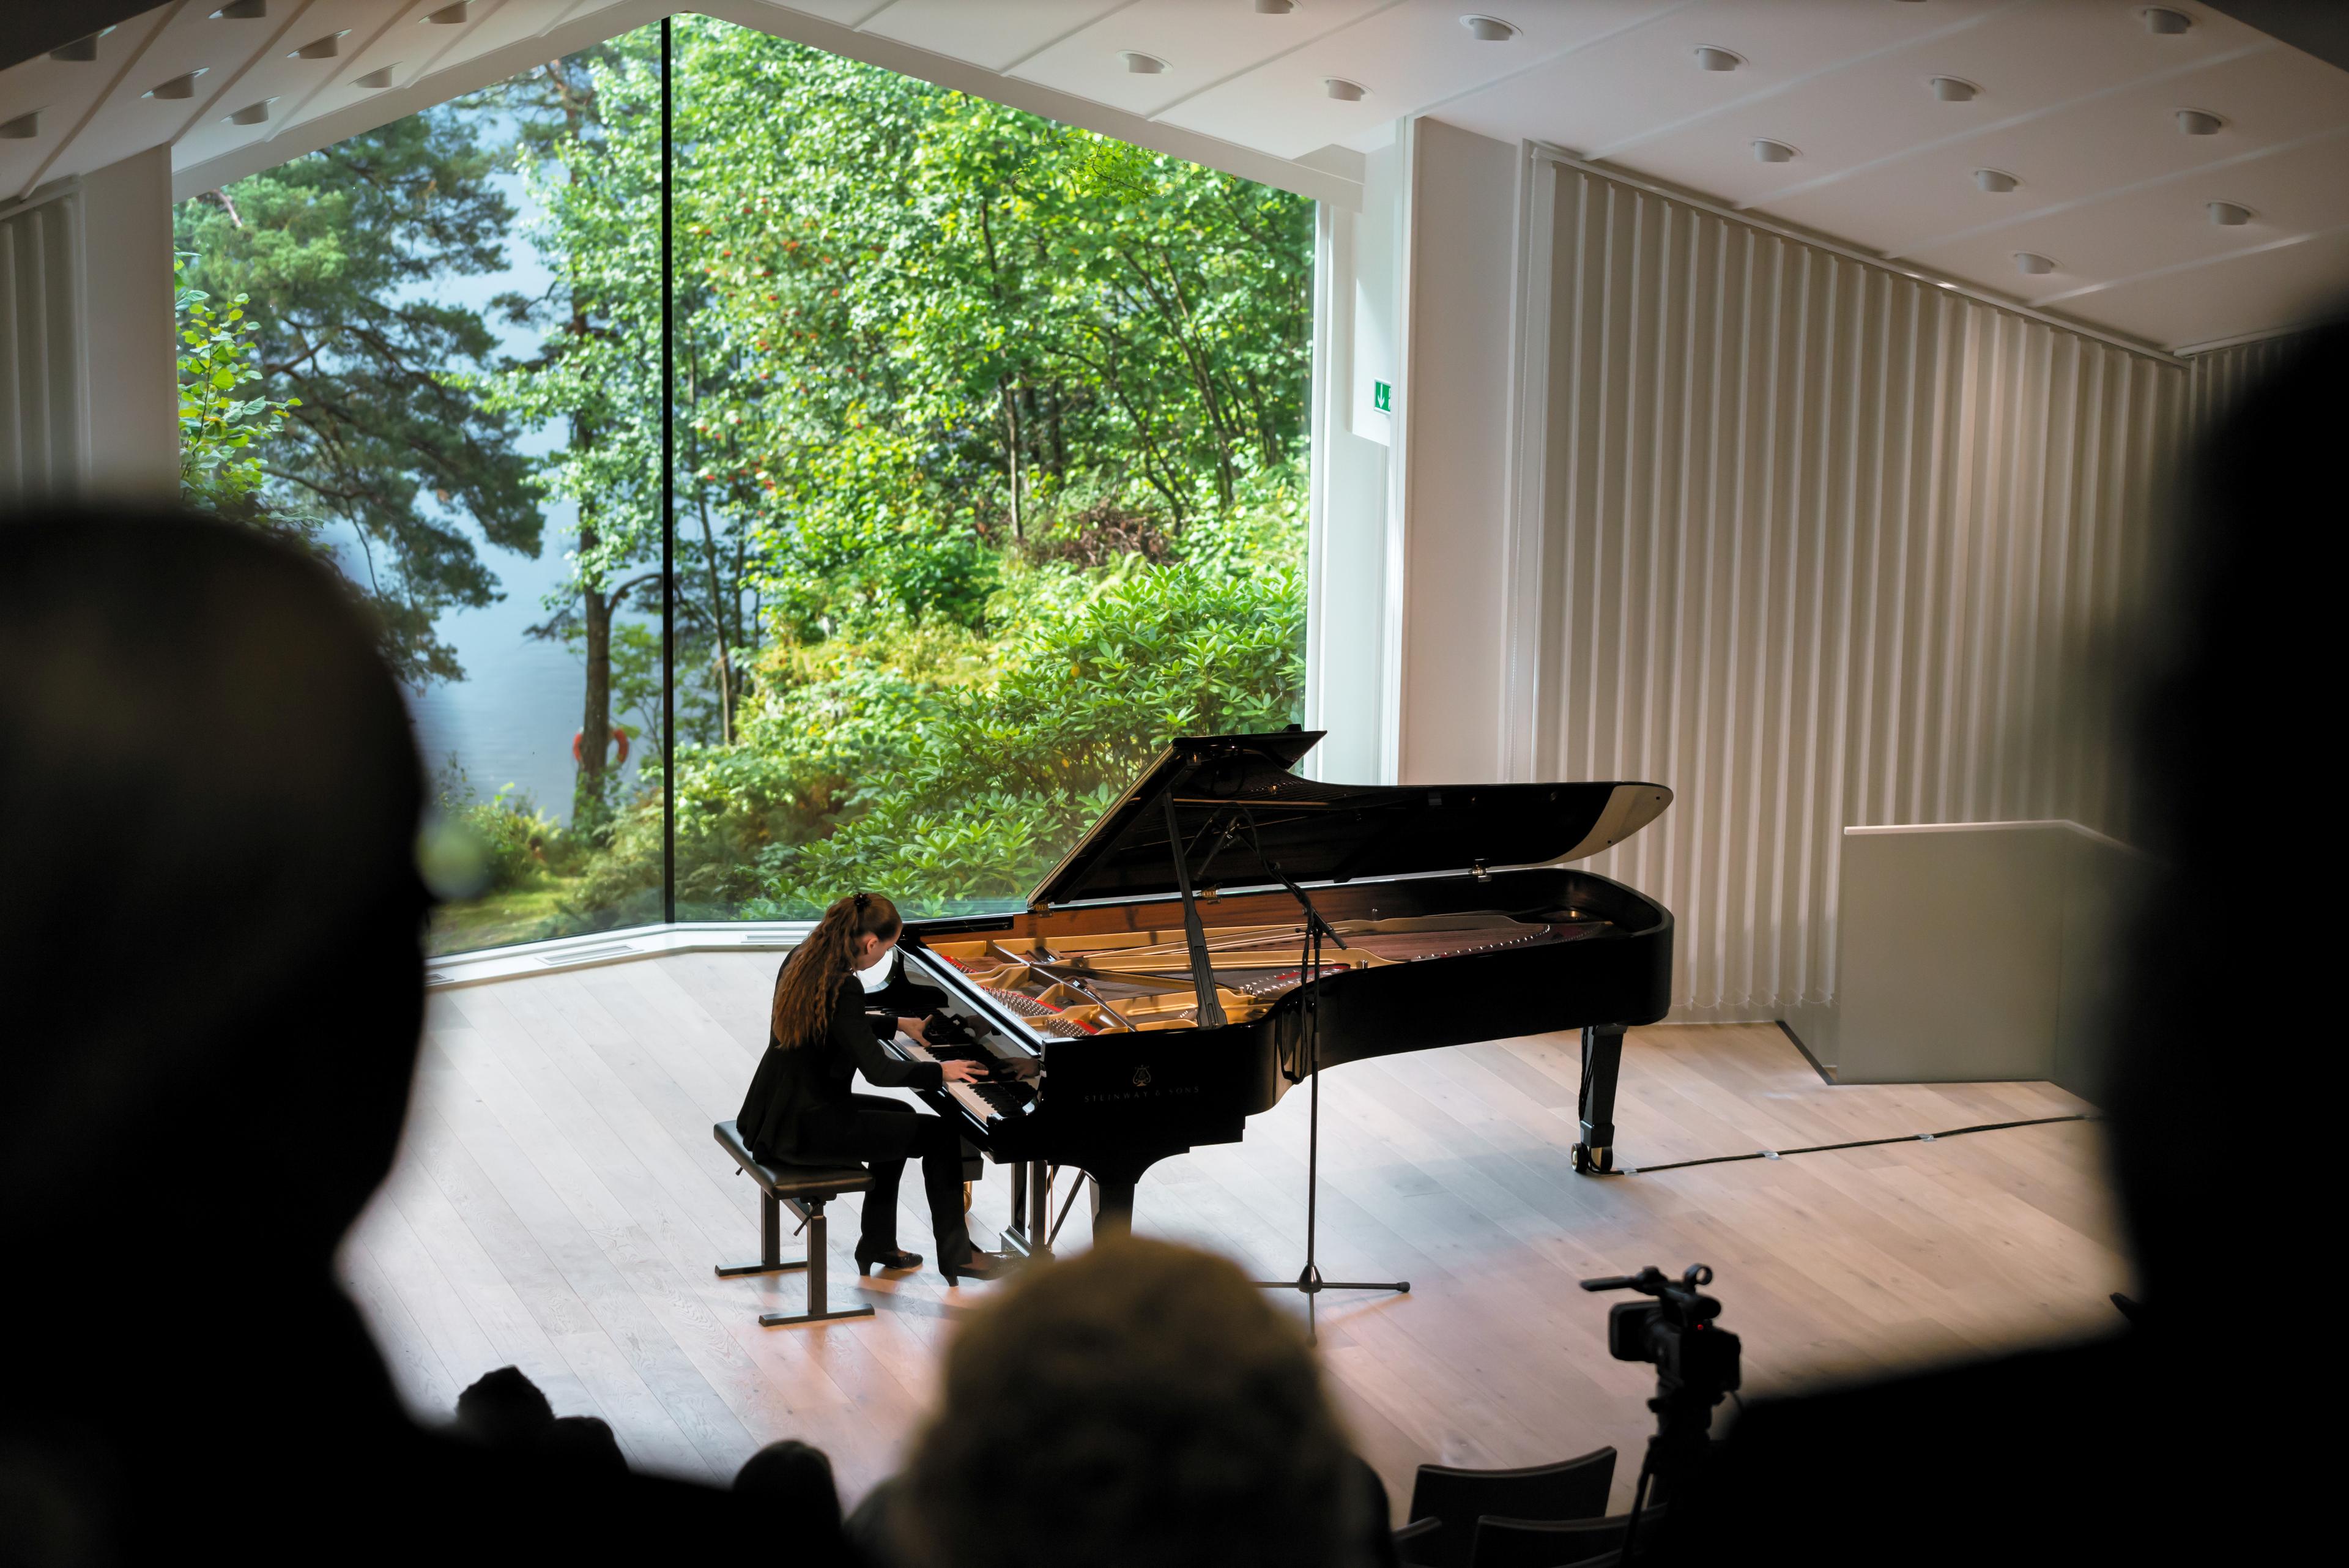 From the Troldsalen concert hall, where a pianist is performing, seated at the piano.